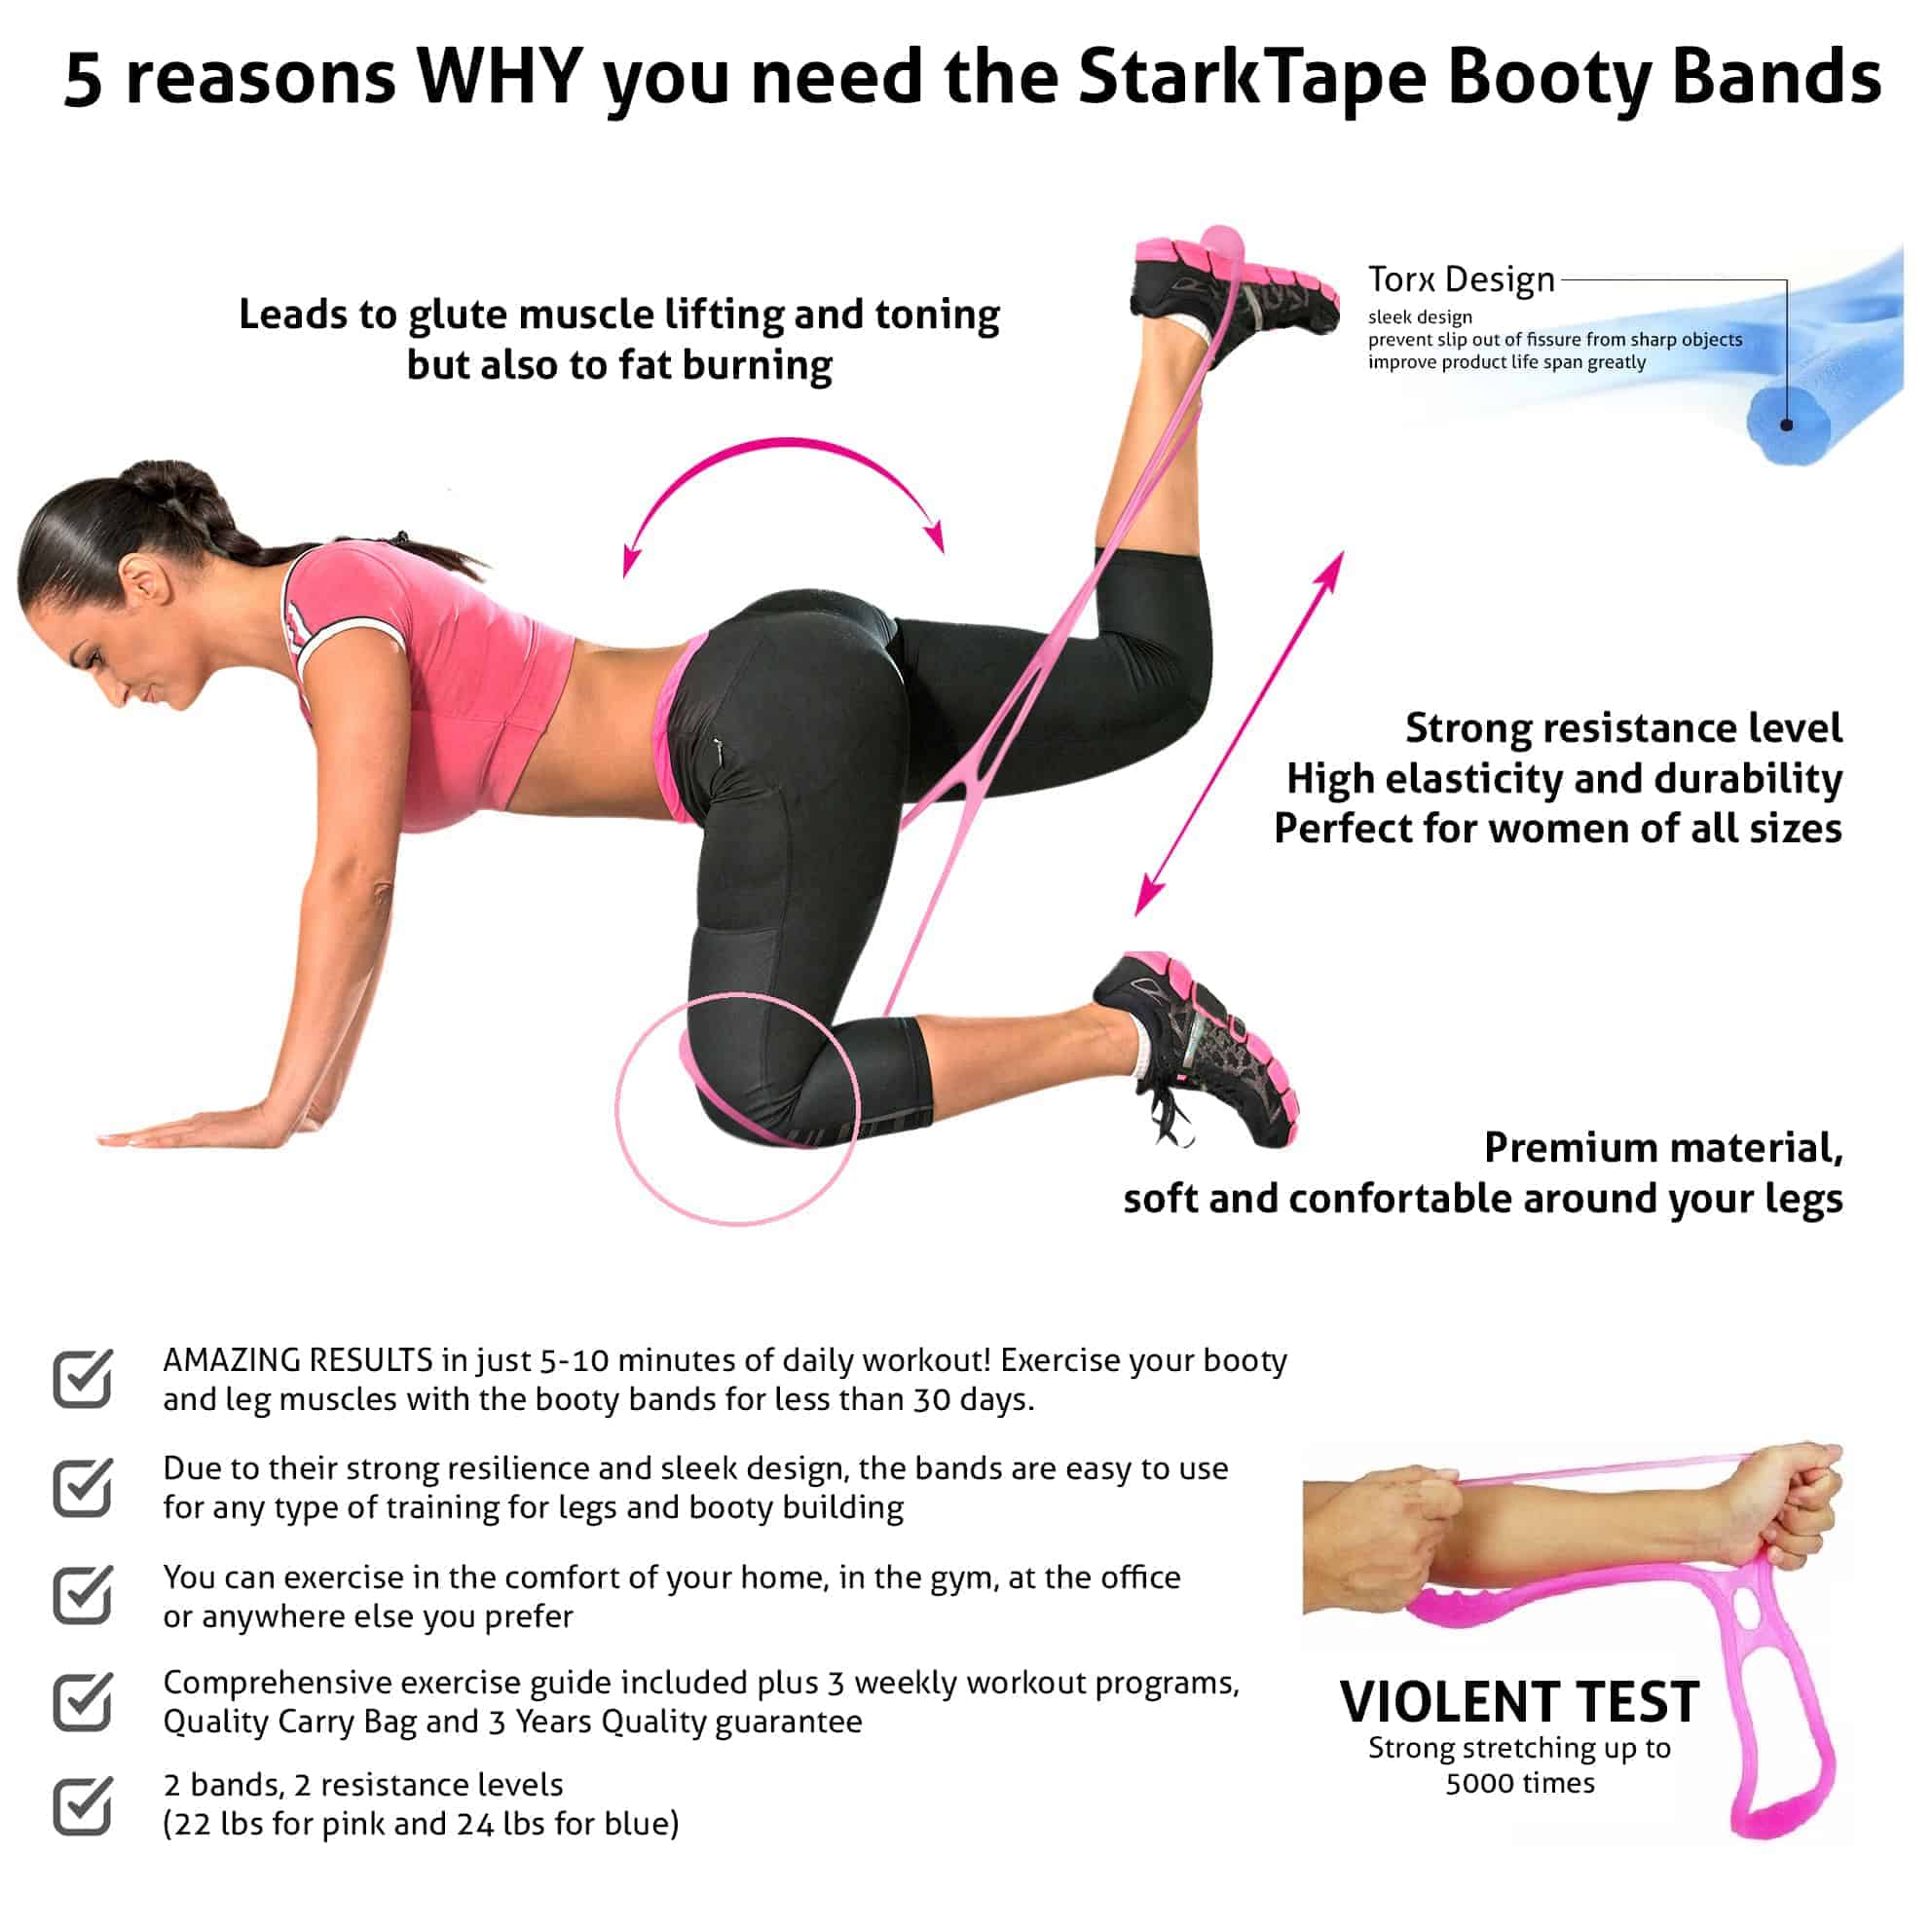 What Are Booty Bands And Why Should You Use Them?